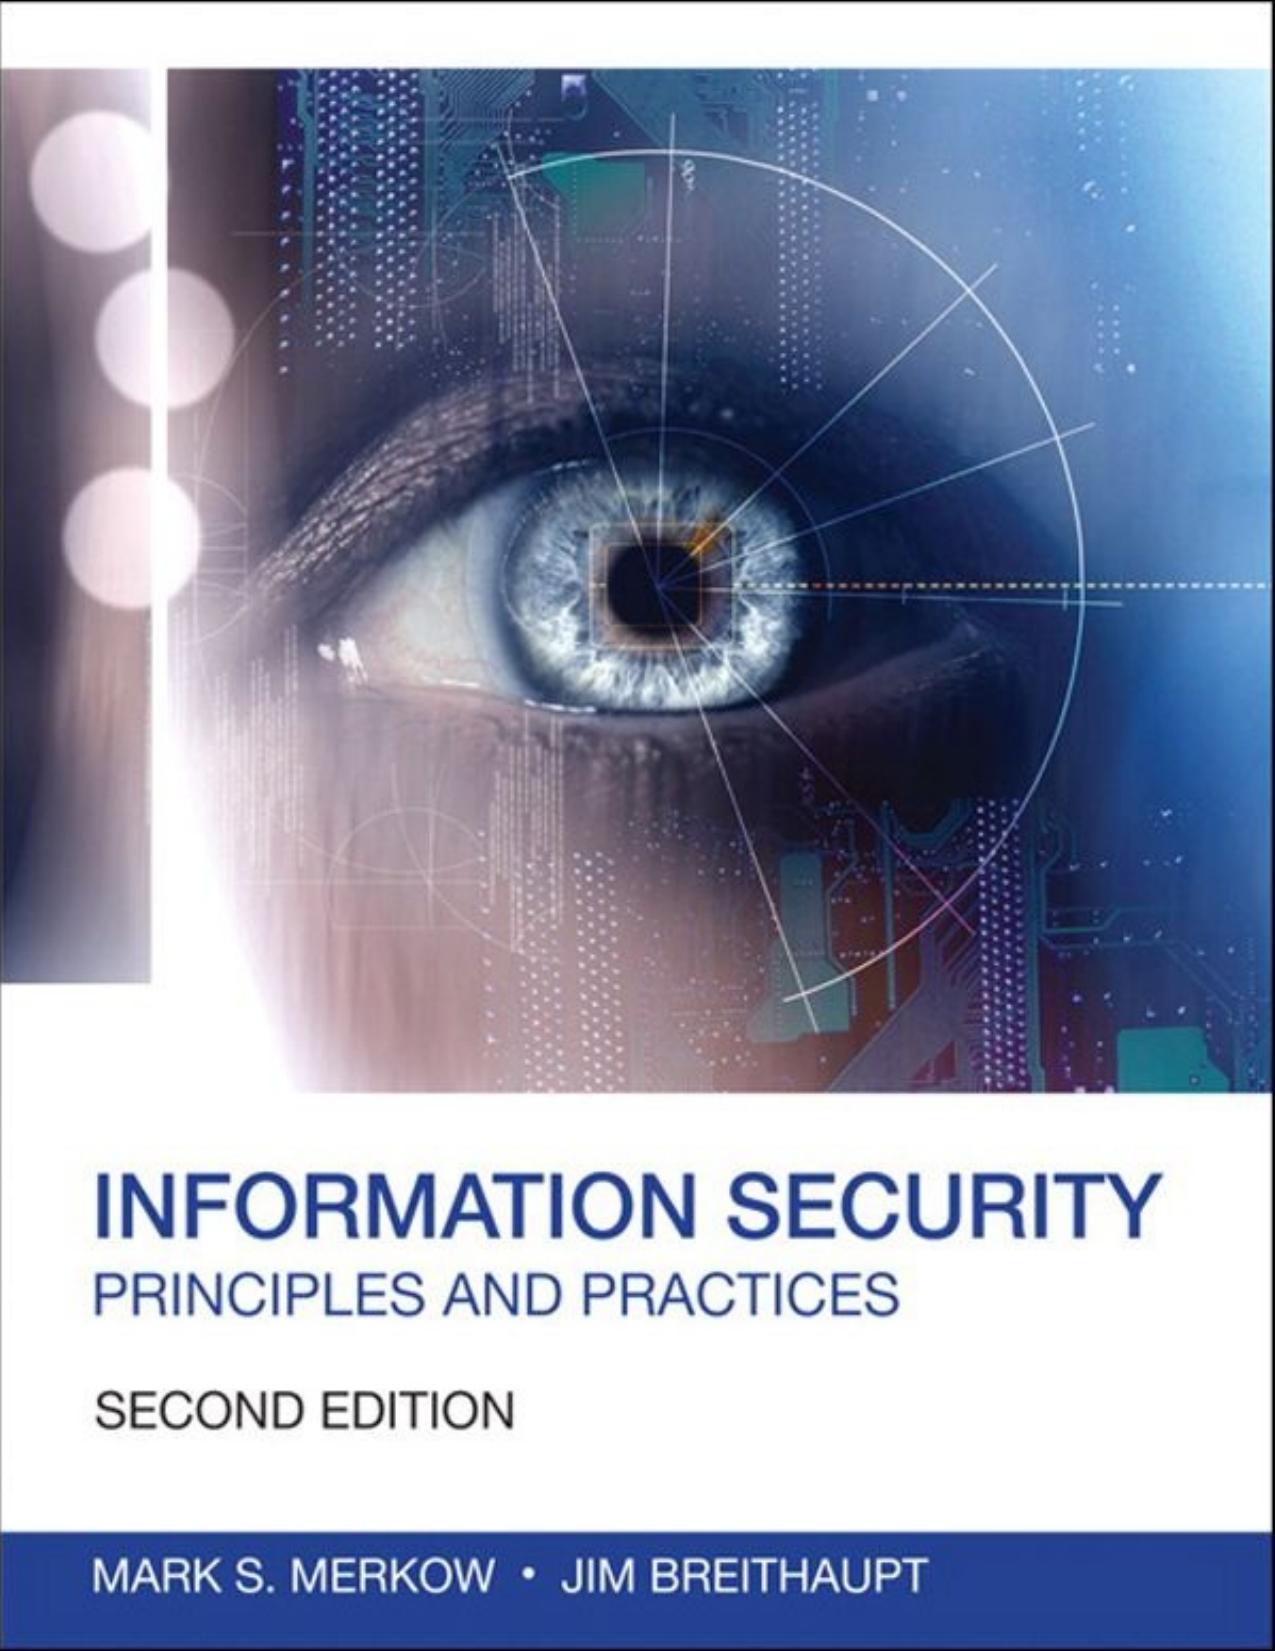 Information Security Principles and Practices 2nd Edition - Mark S. Merkow & Jim Breithaupt.jpg